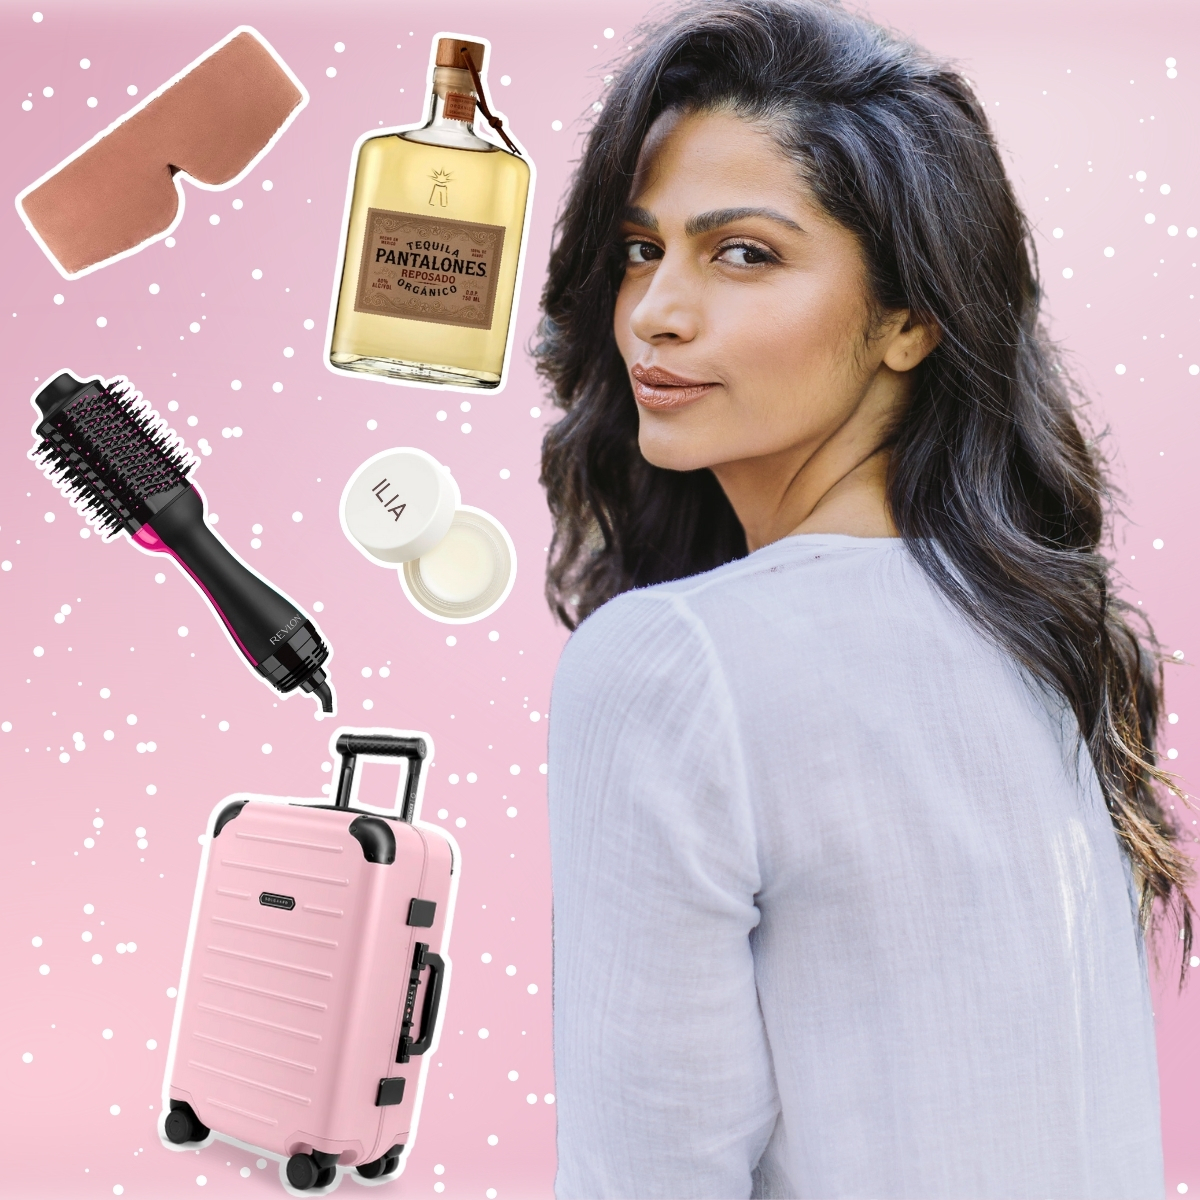 Become the Best Gift Giver with Camila Alves McConaughey’s Gift Ideas